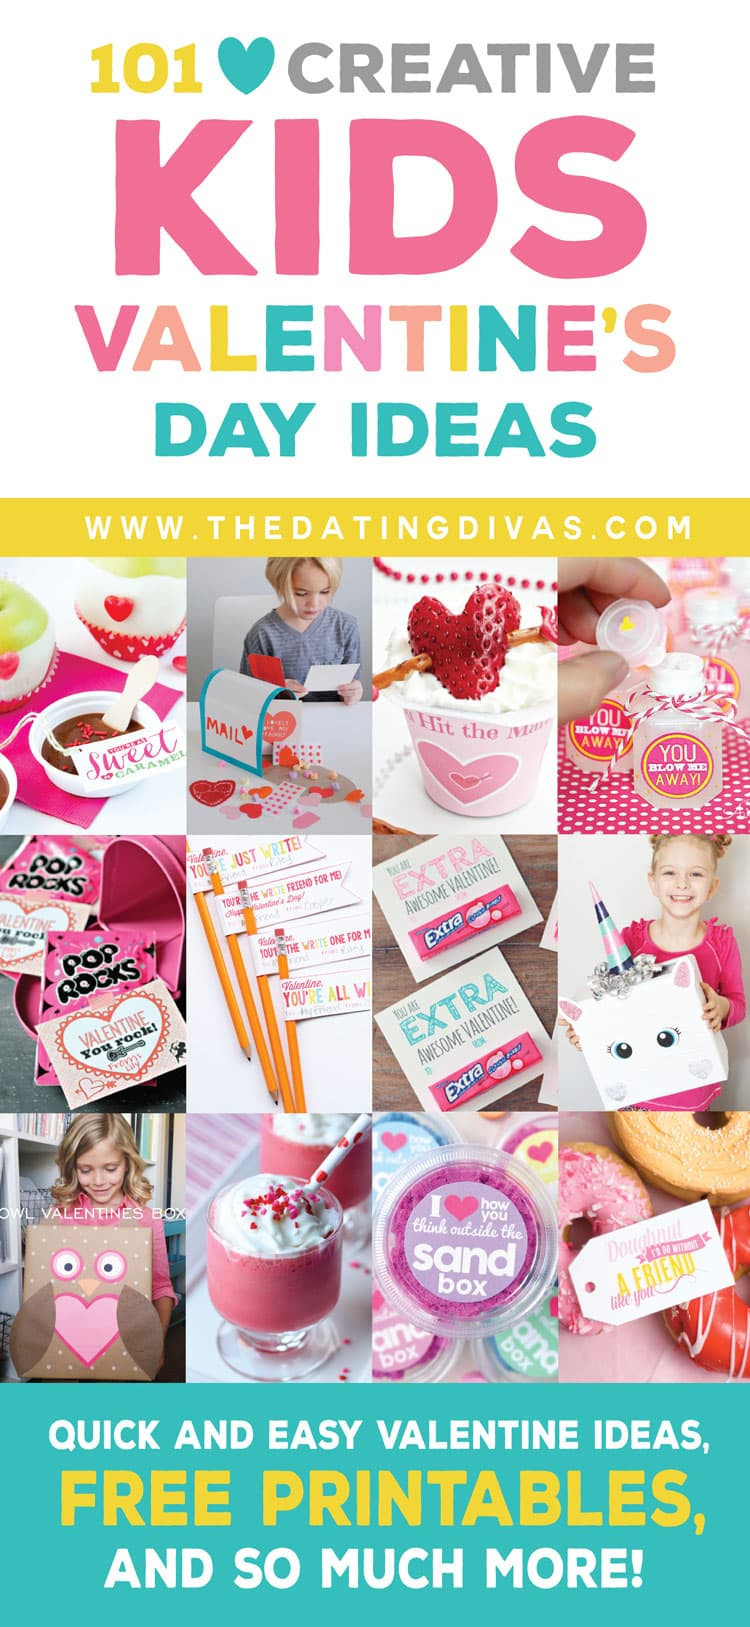 Creatives Ideas For Valentines Day
 Kids Valentine s Day Ideas From The Dating Divas